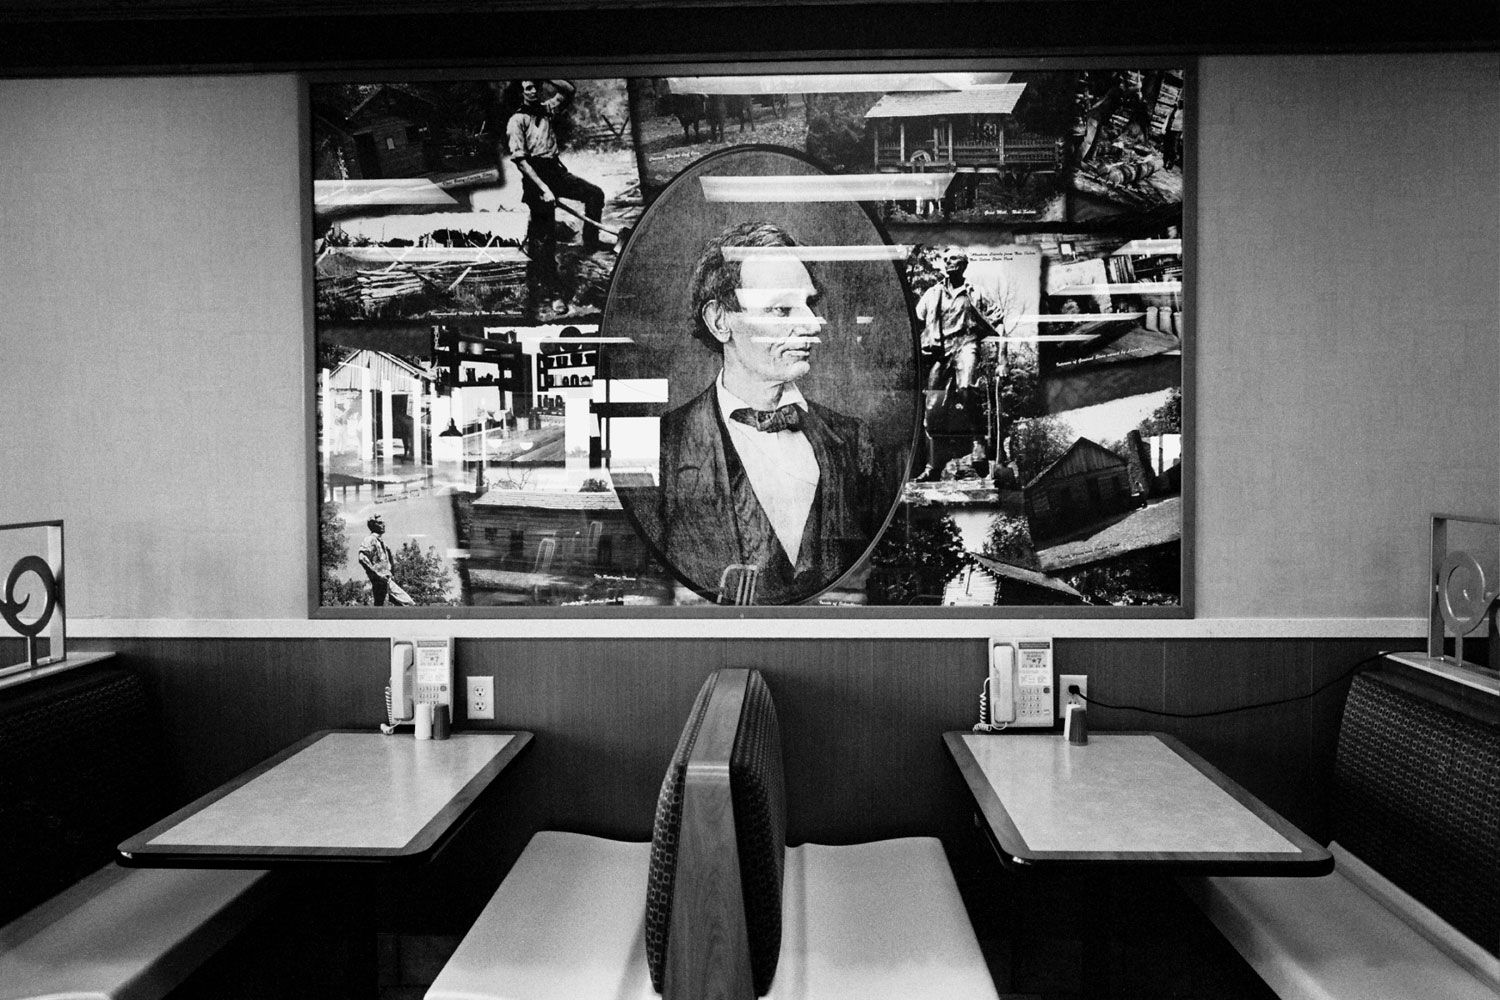 Abe Lincoln graces the walls above a booth at a roadside diner in Illinois.